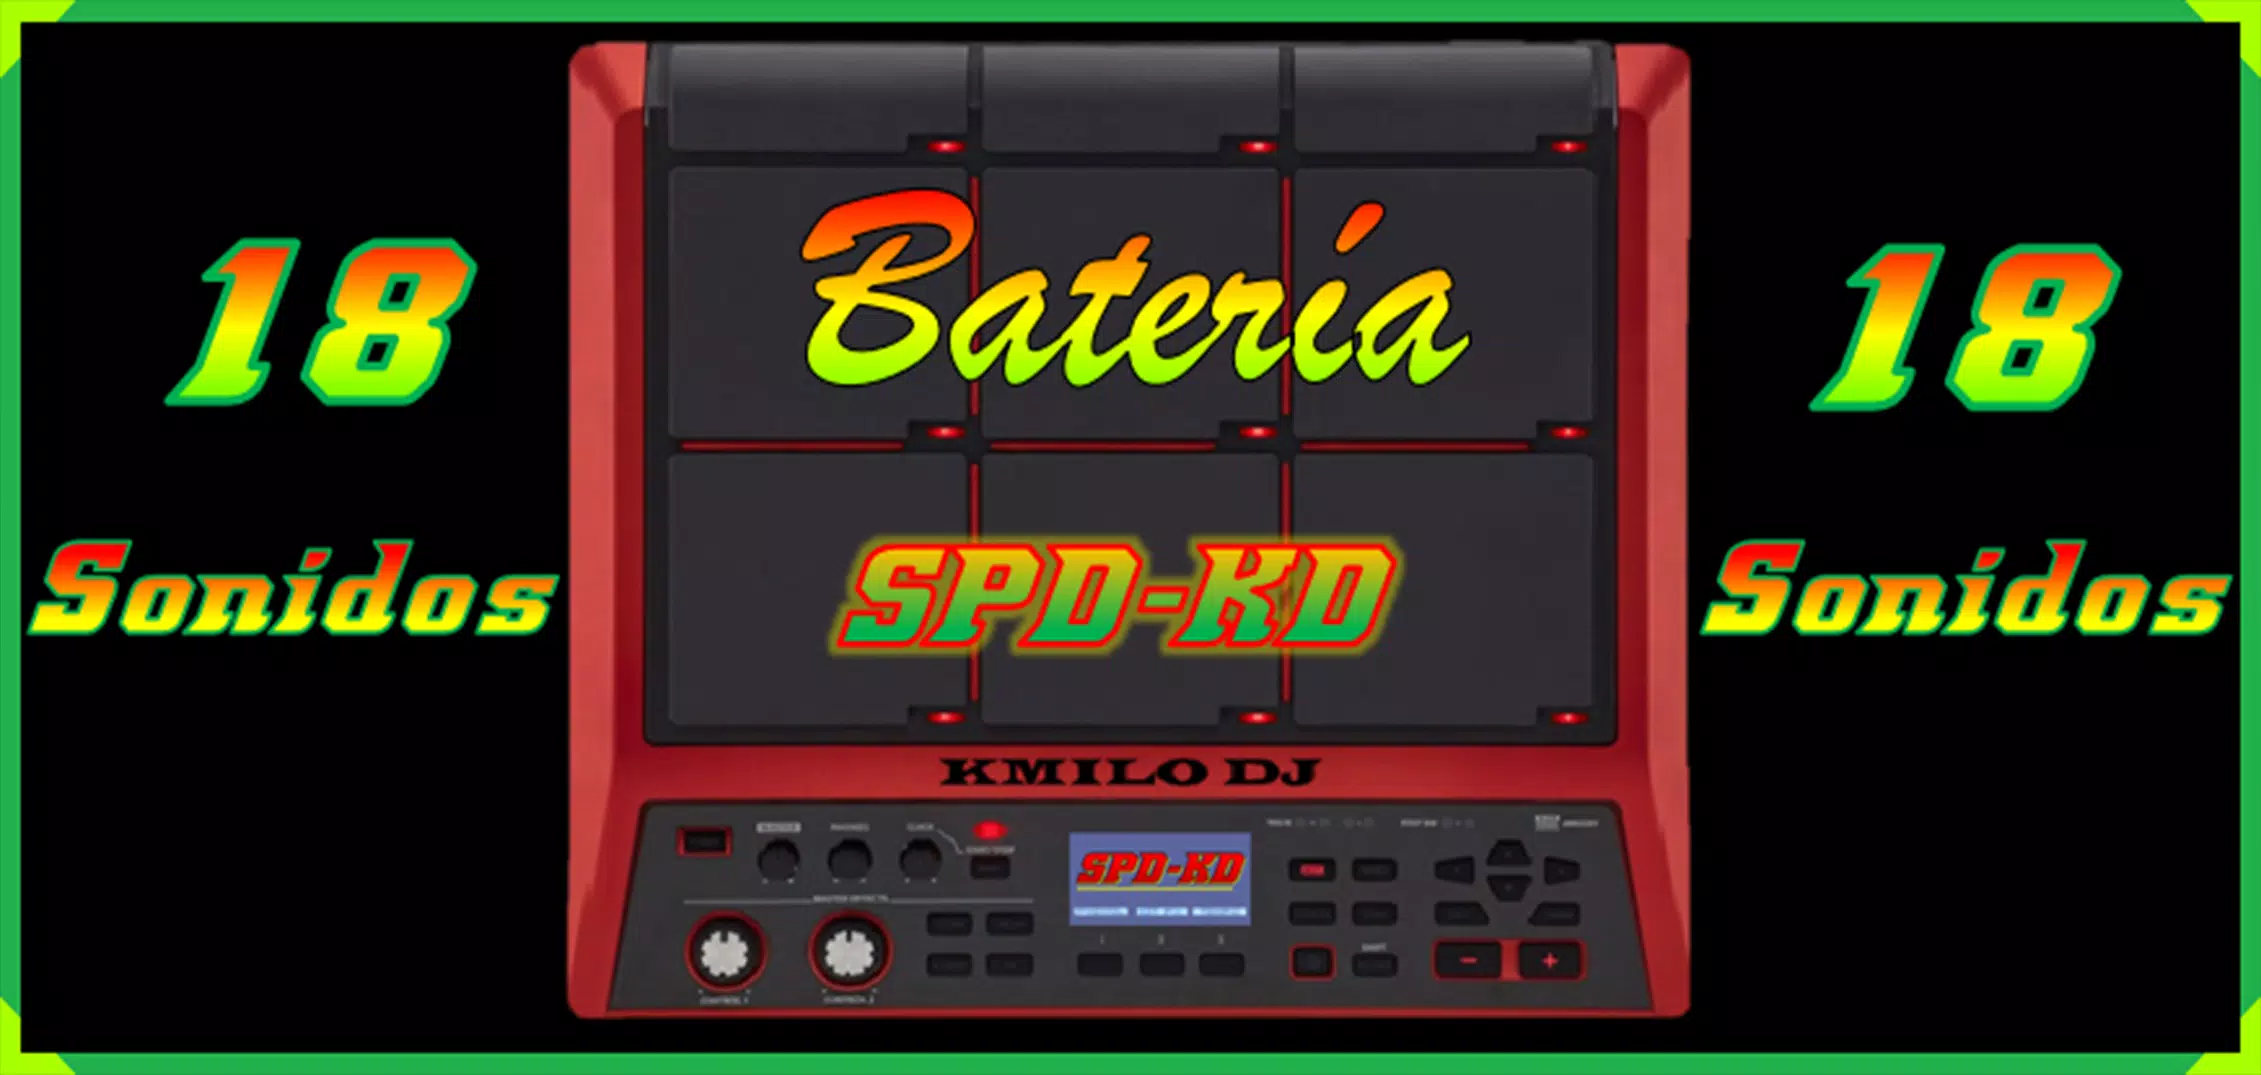 Batería SPD-KD (Champeta) APK for Android Download